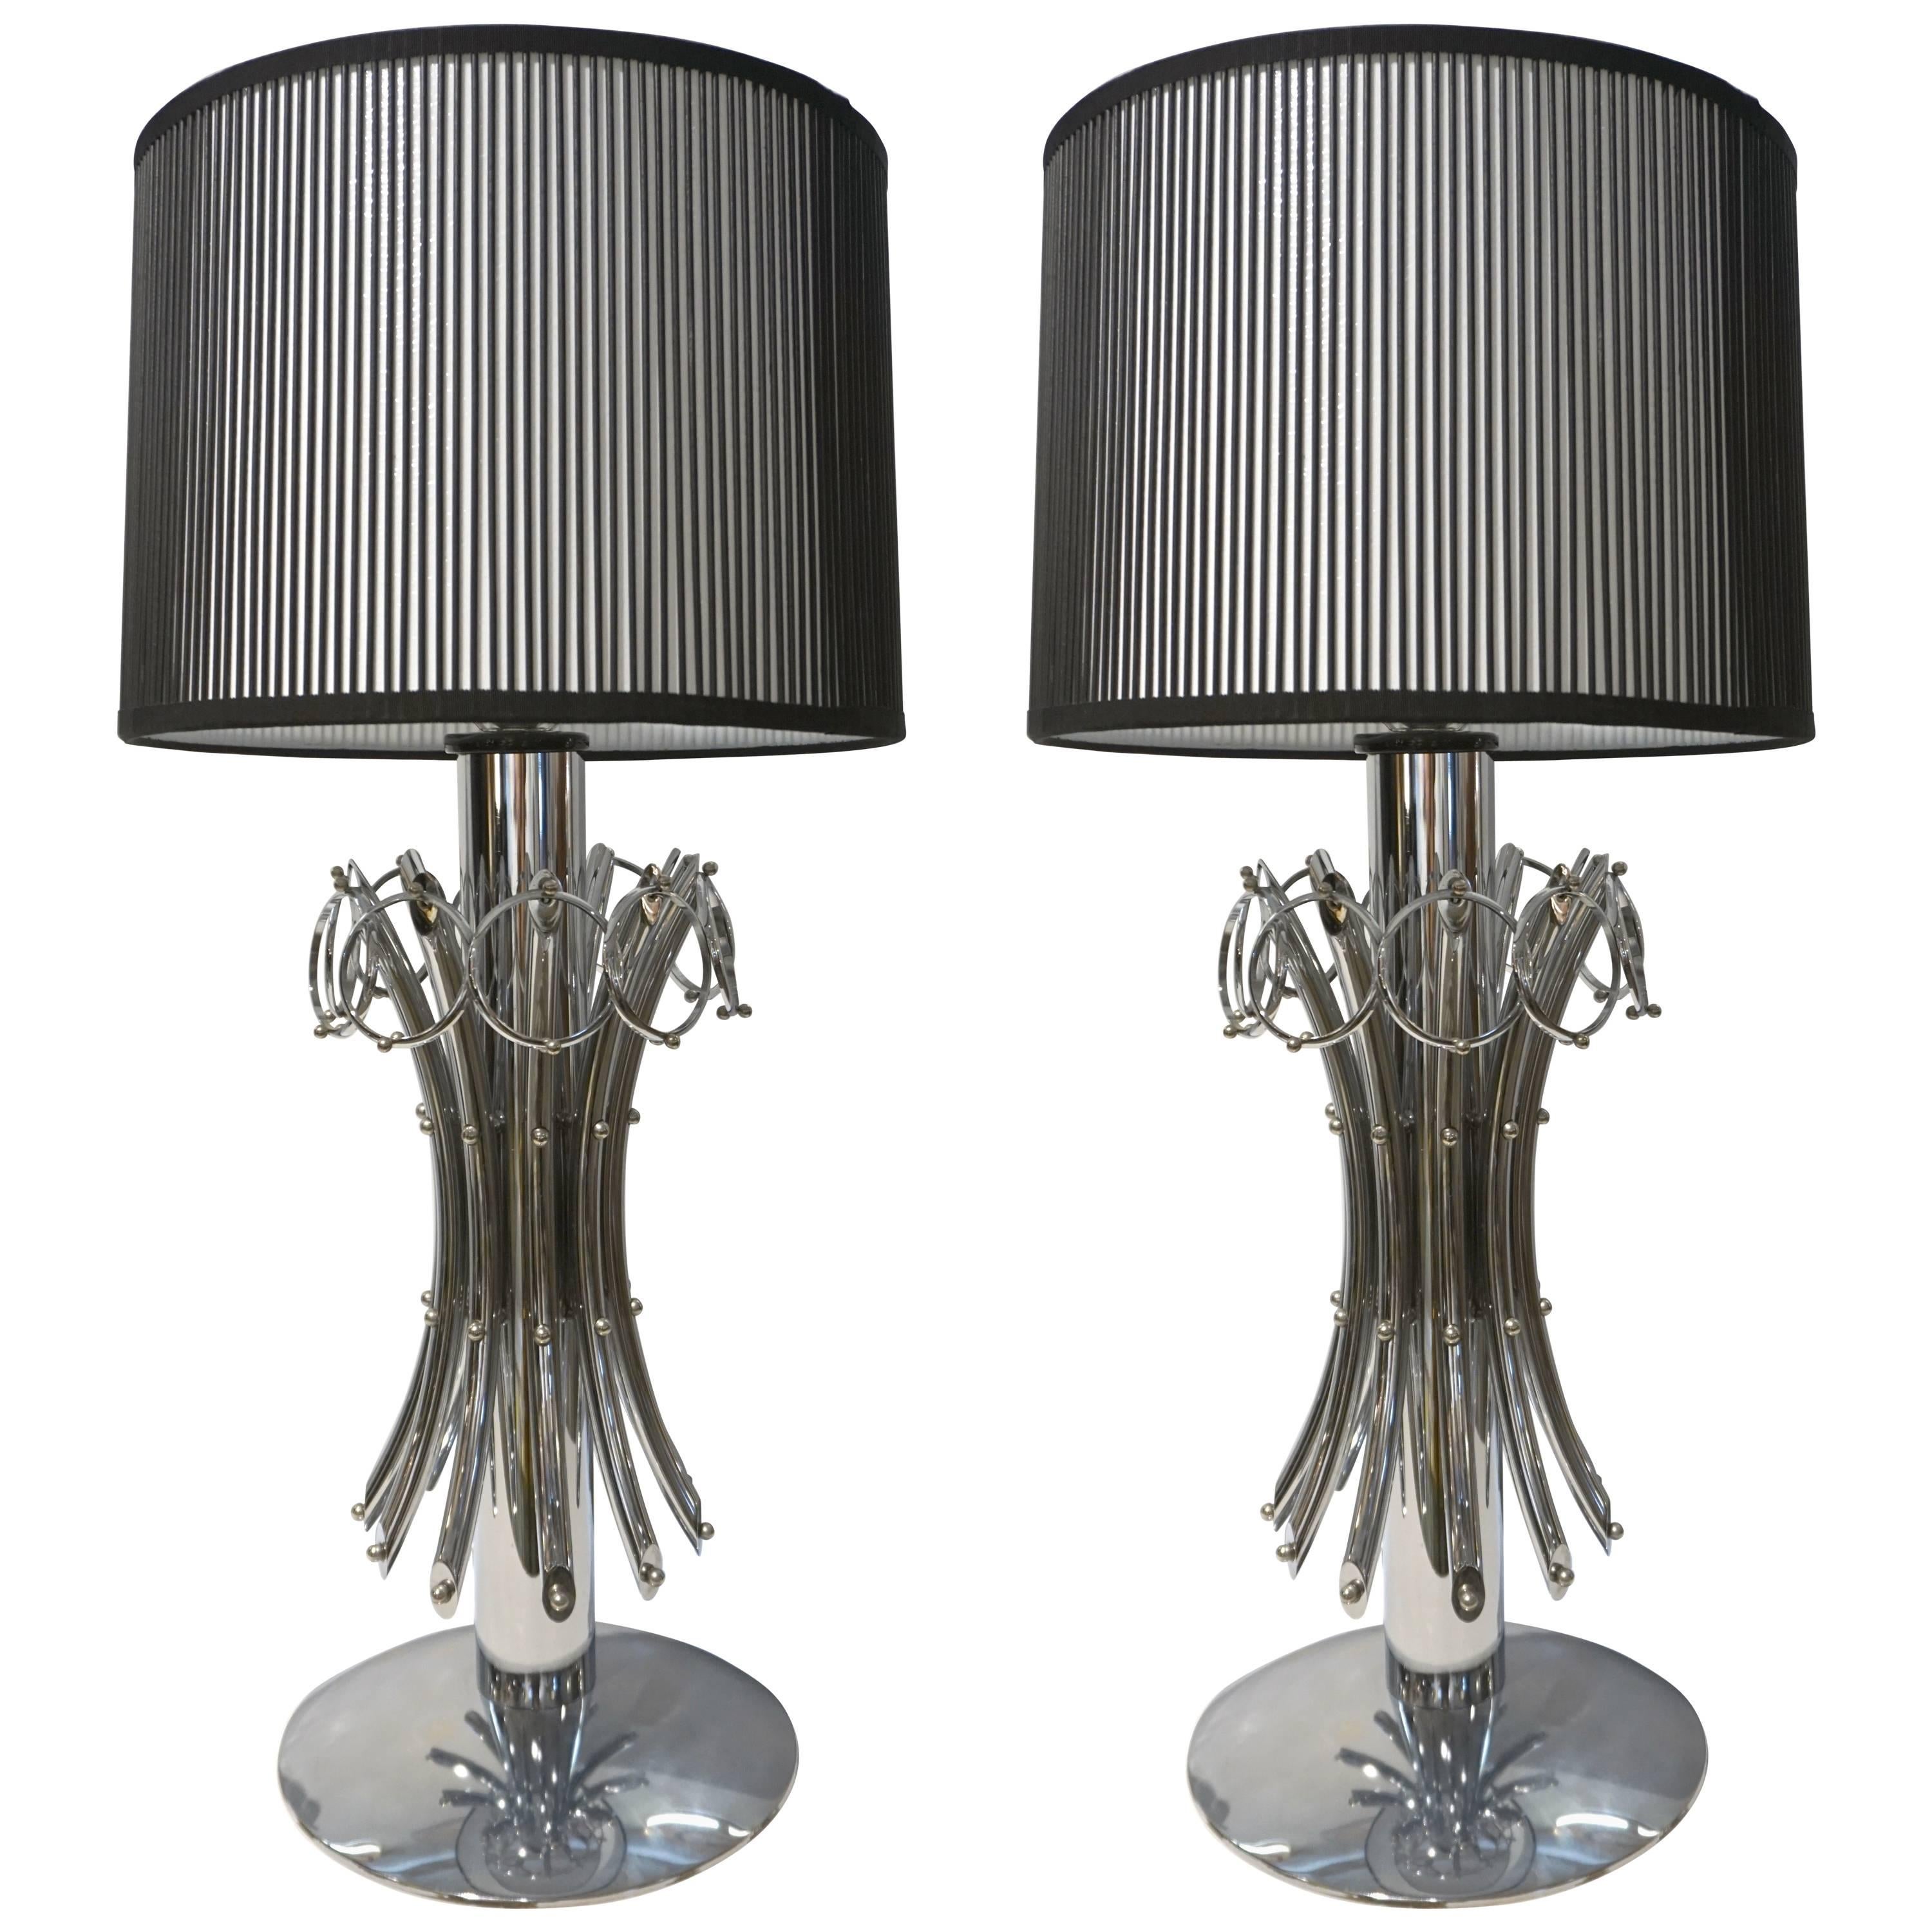 1970s Italian Vintage Tall Pair of Organic Nickel Table Lamps with Pendant Rings For Sale